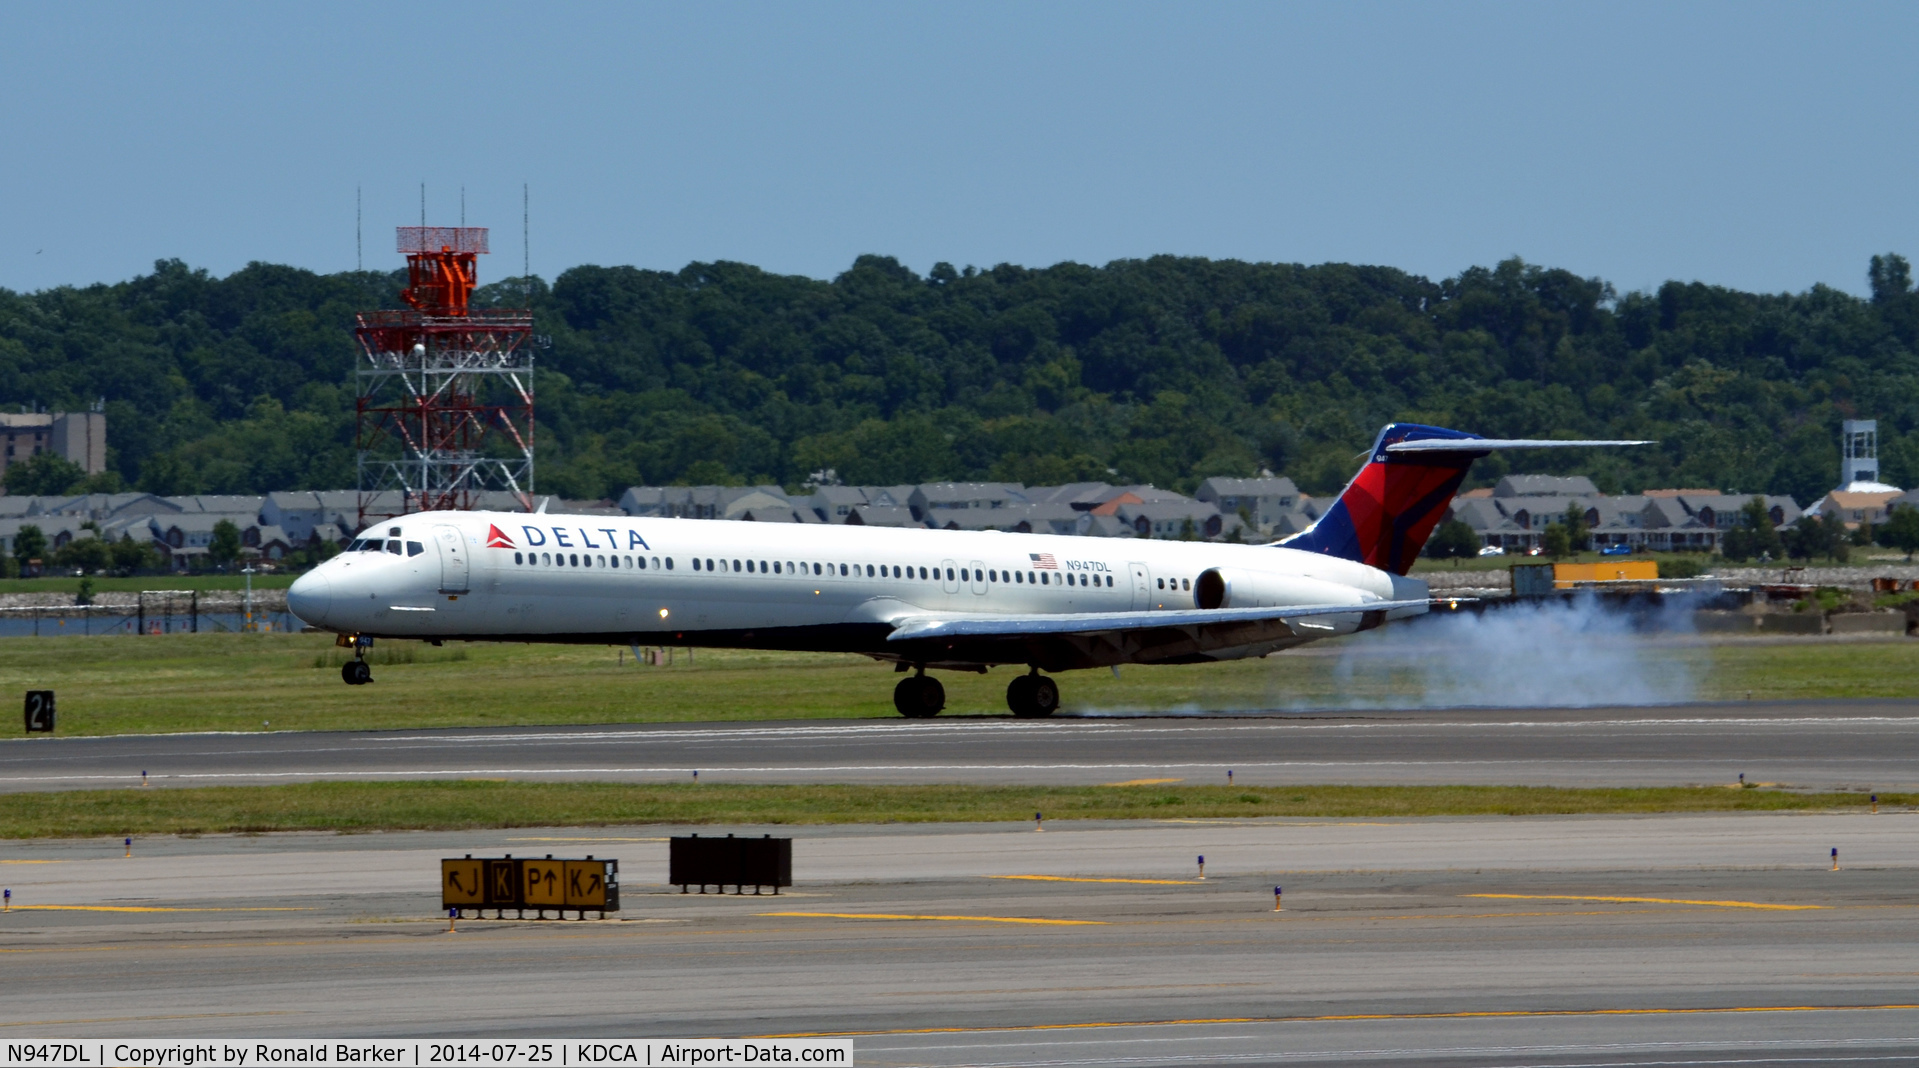 N947DL, 1989 McDonnell Douglas MD-88 C/N 49878, Touch down National